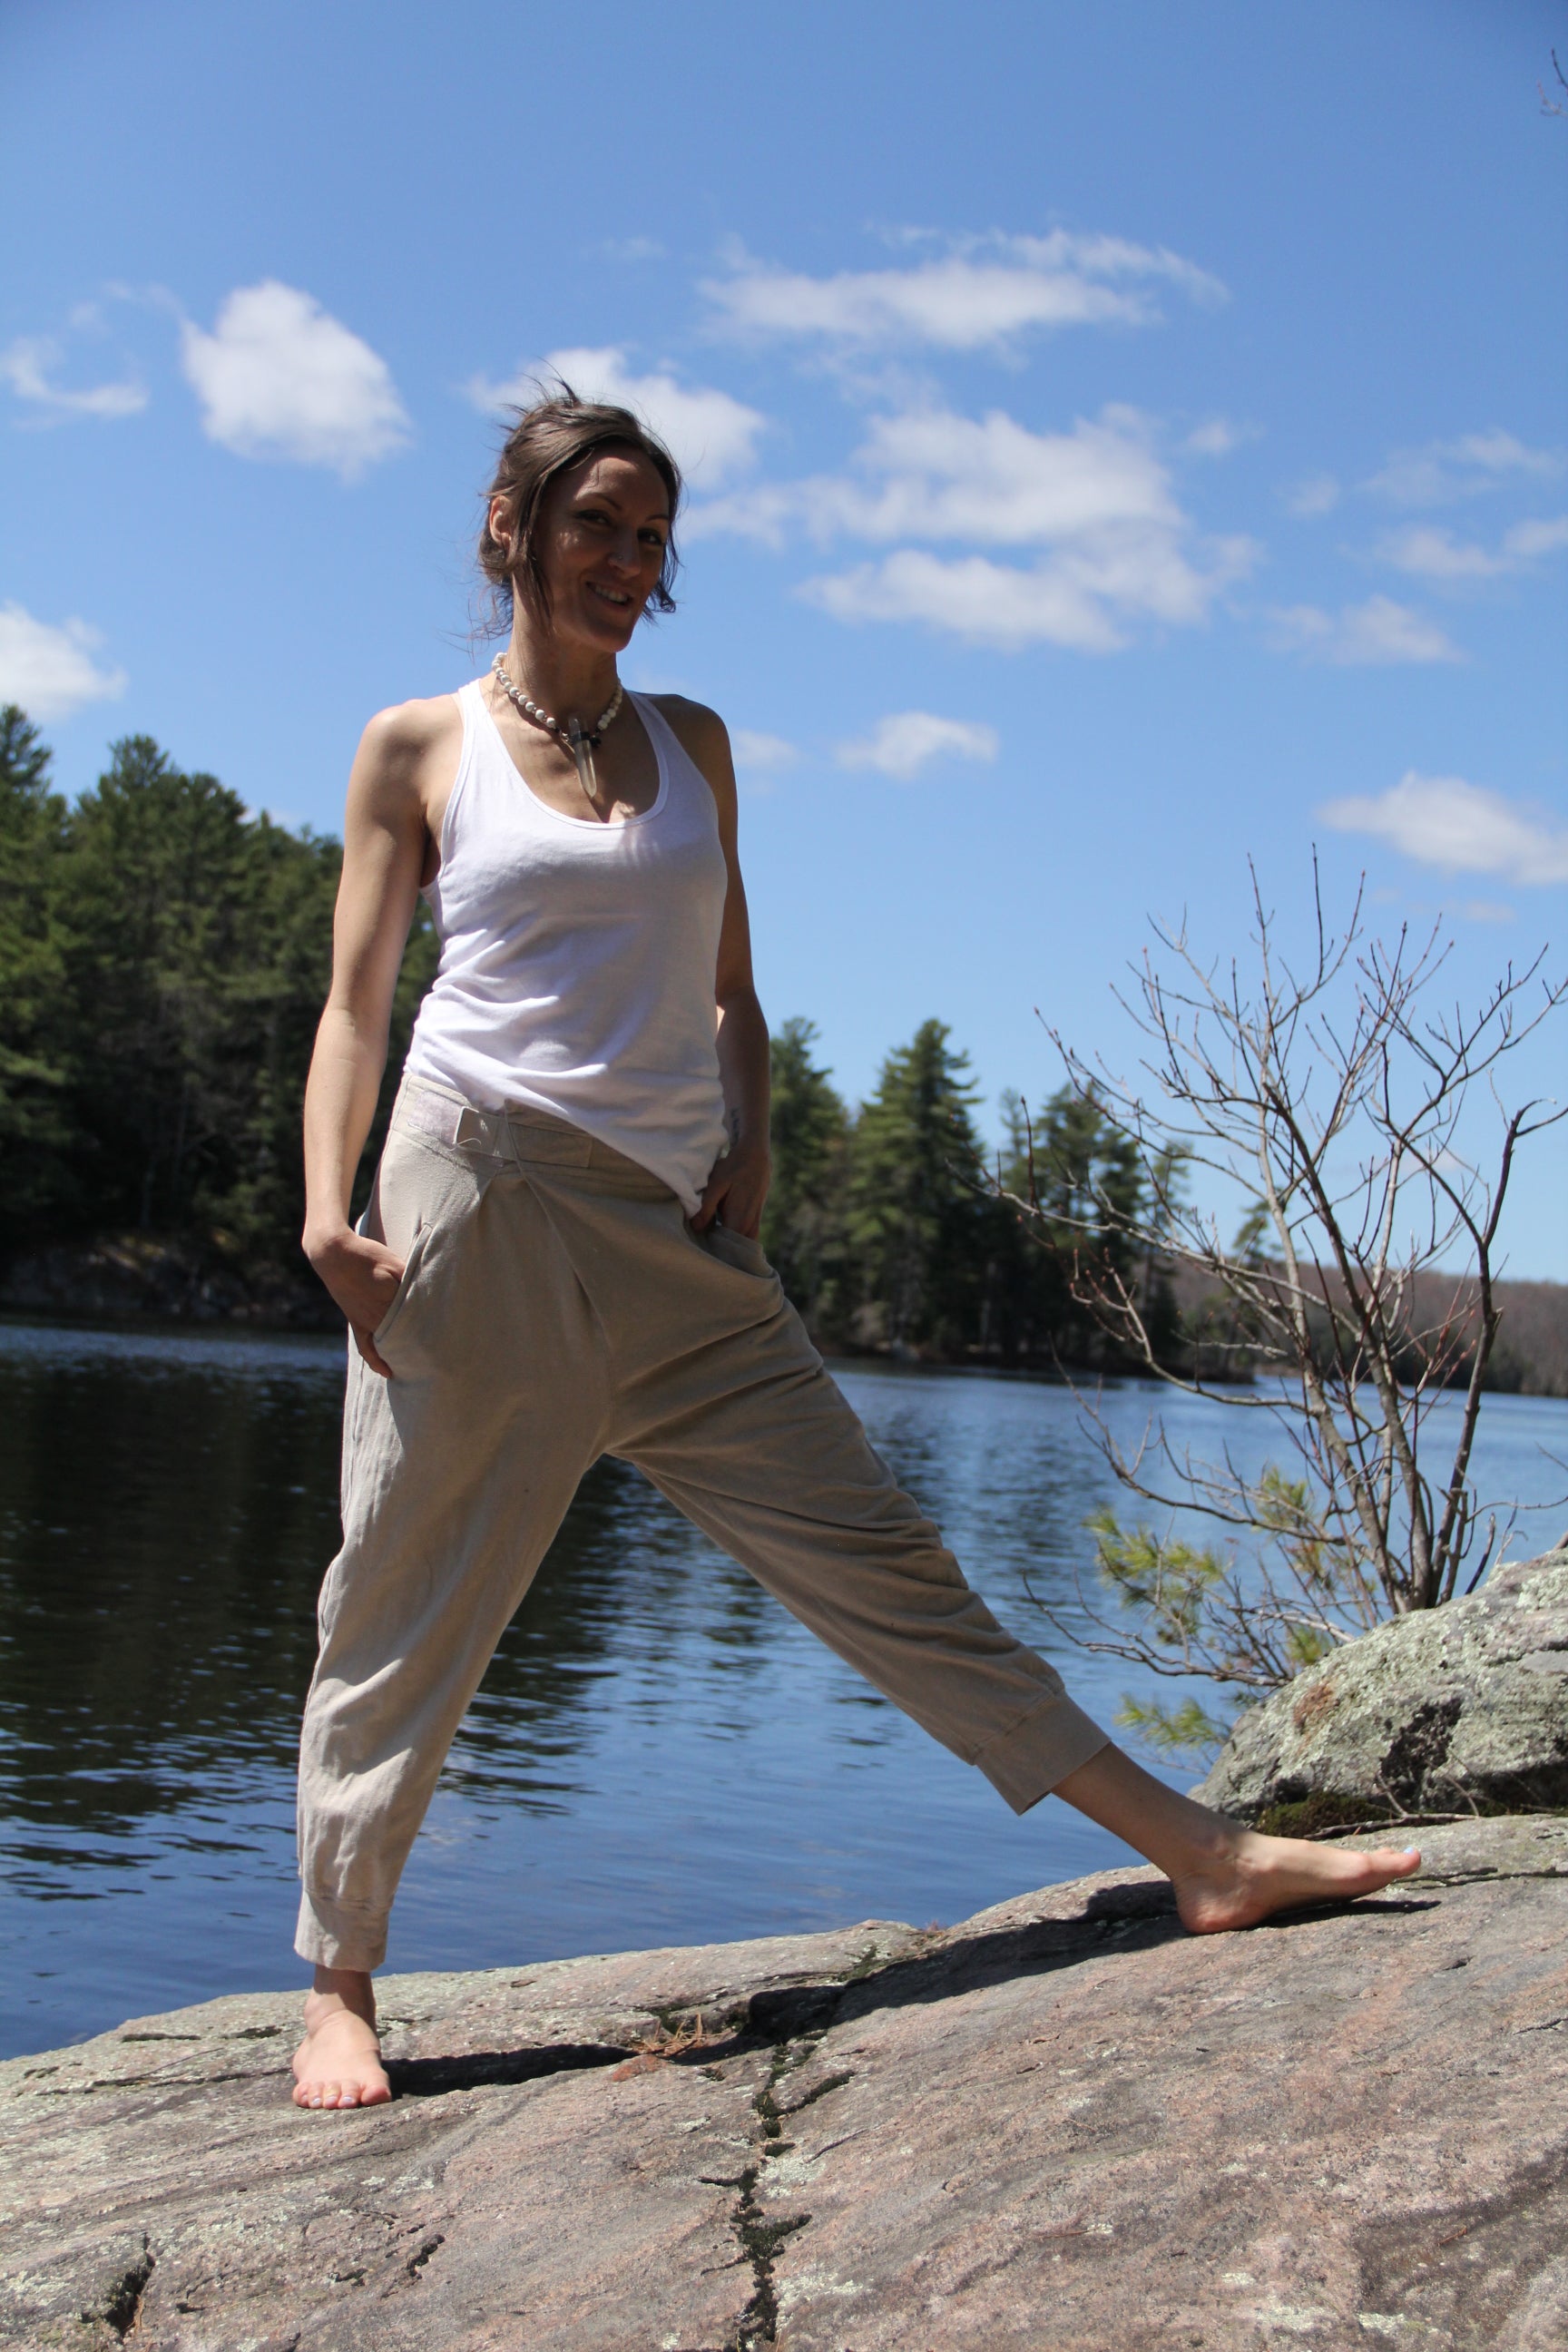 Unisex Crossover Capri - Limited Edition Natural Dye